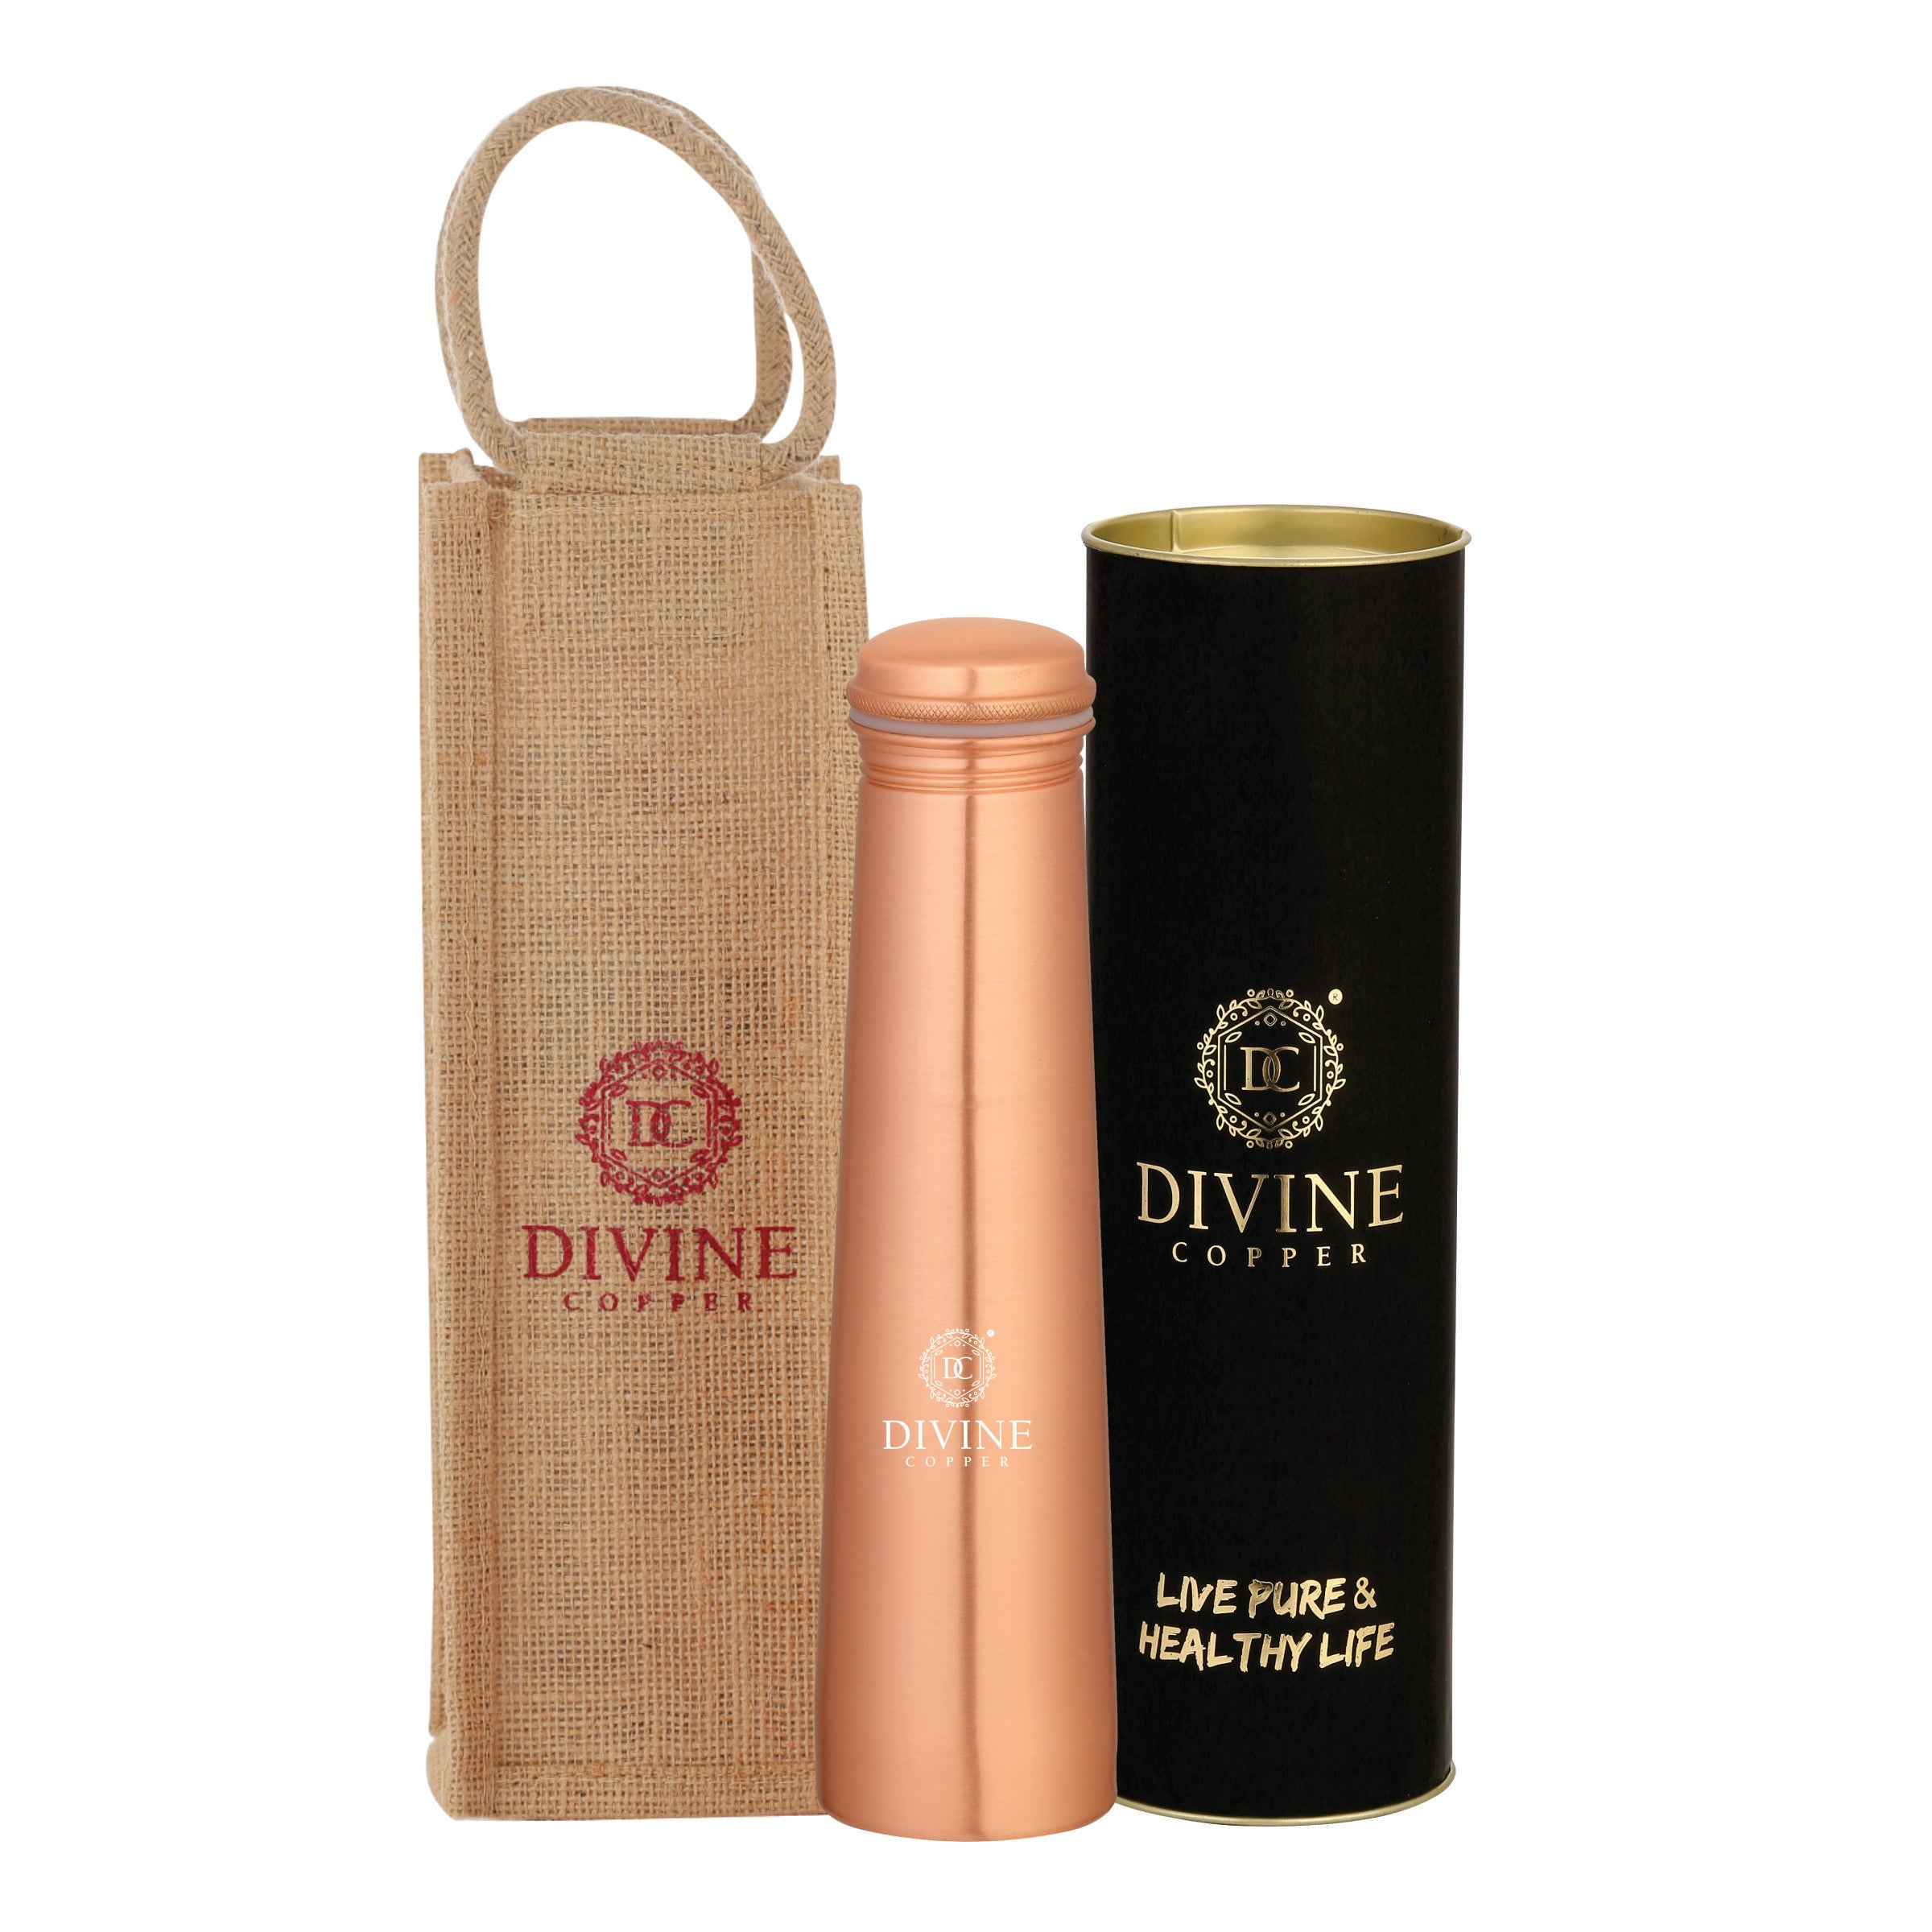 Froyo 750ml copper bottle with free Jute carry bag